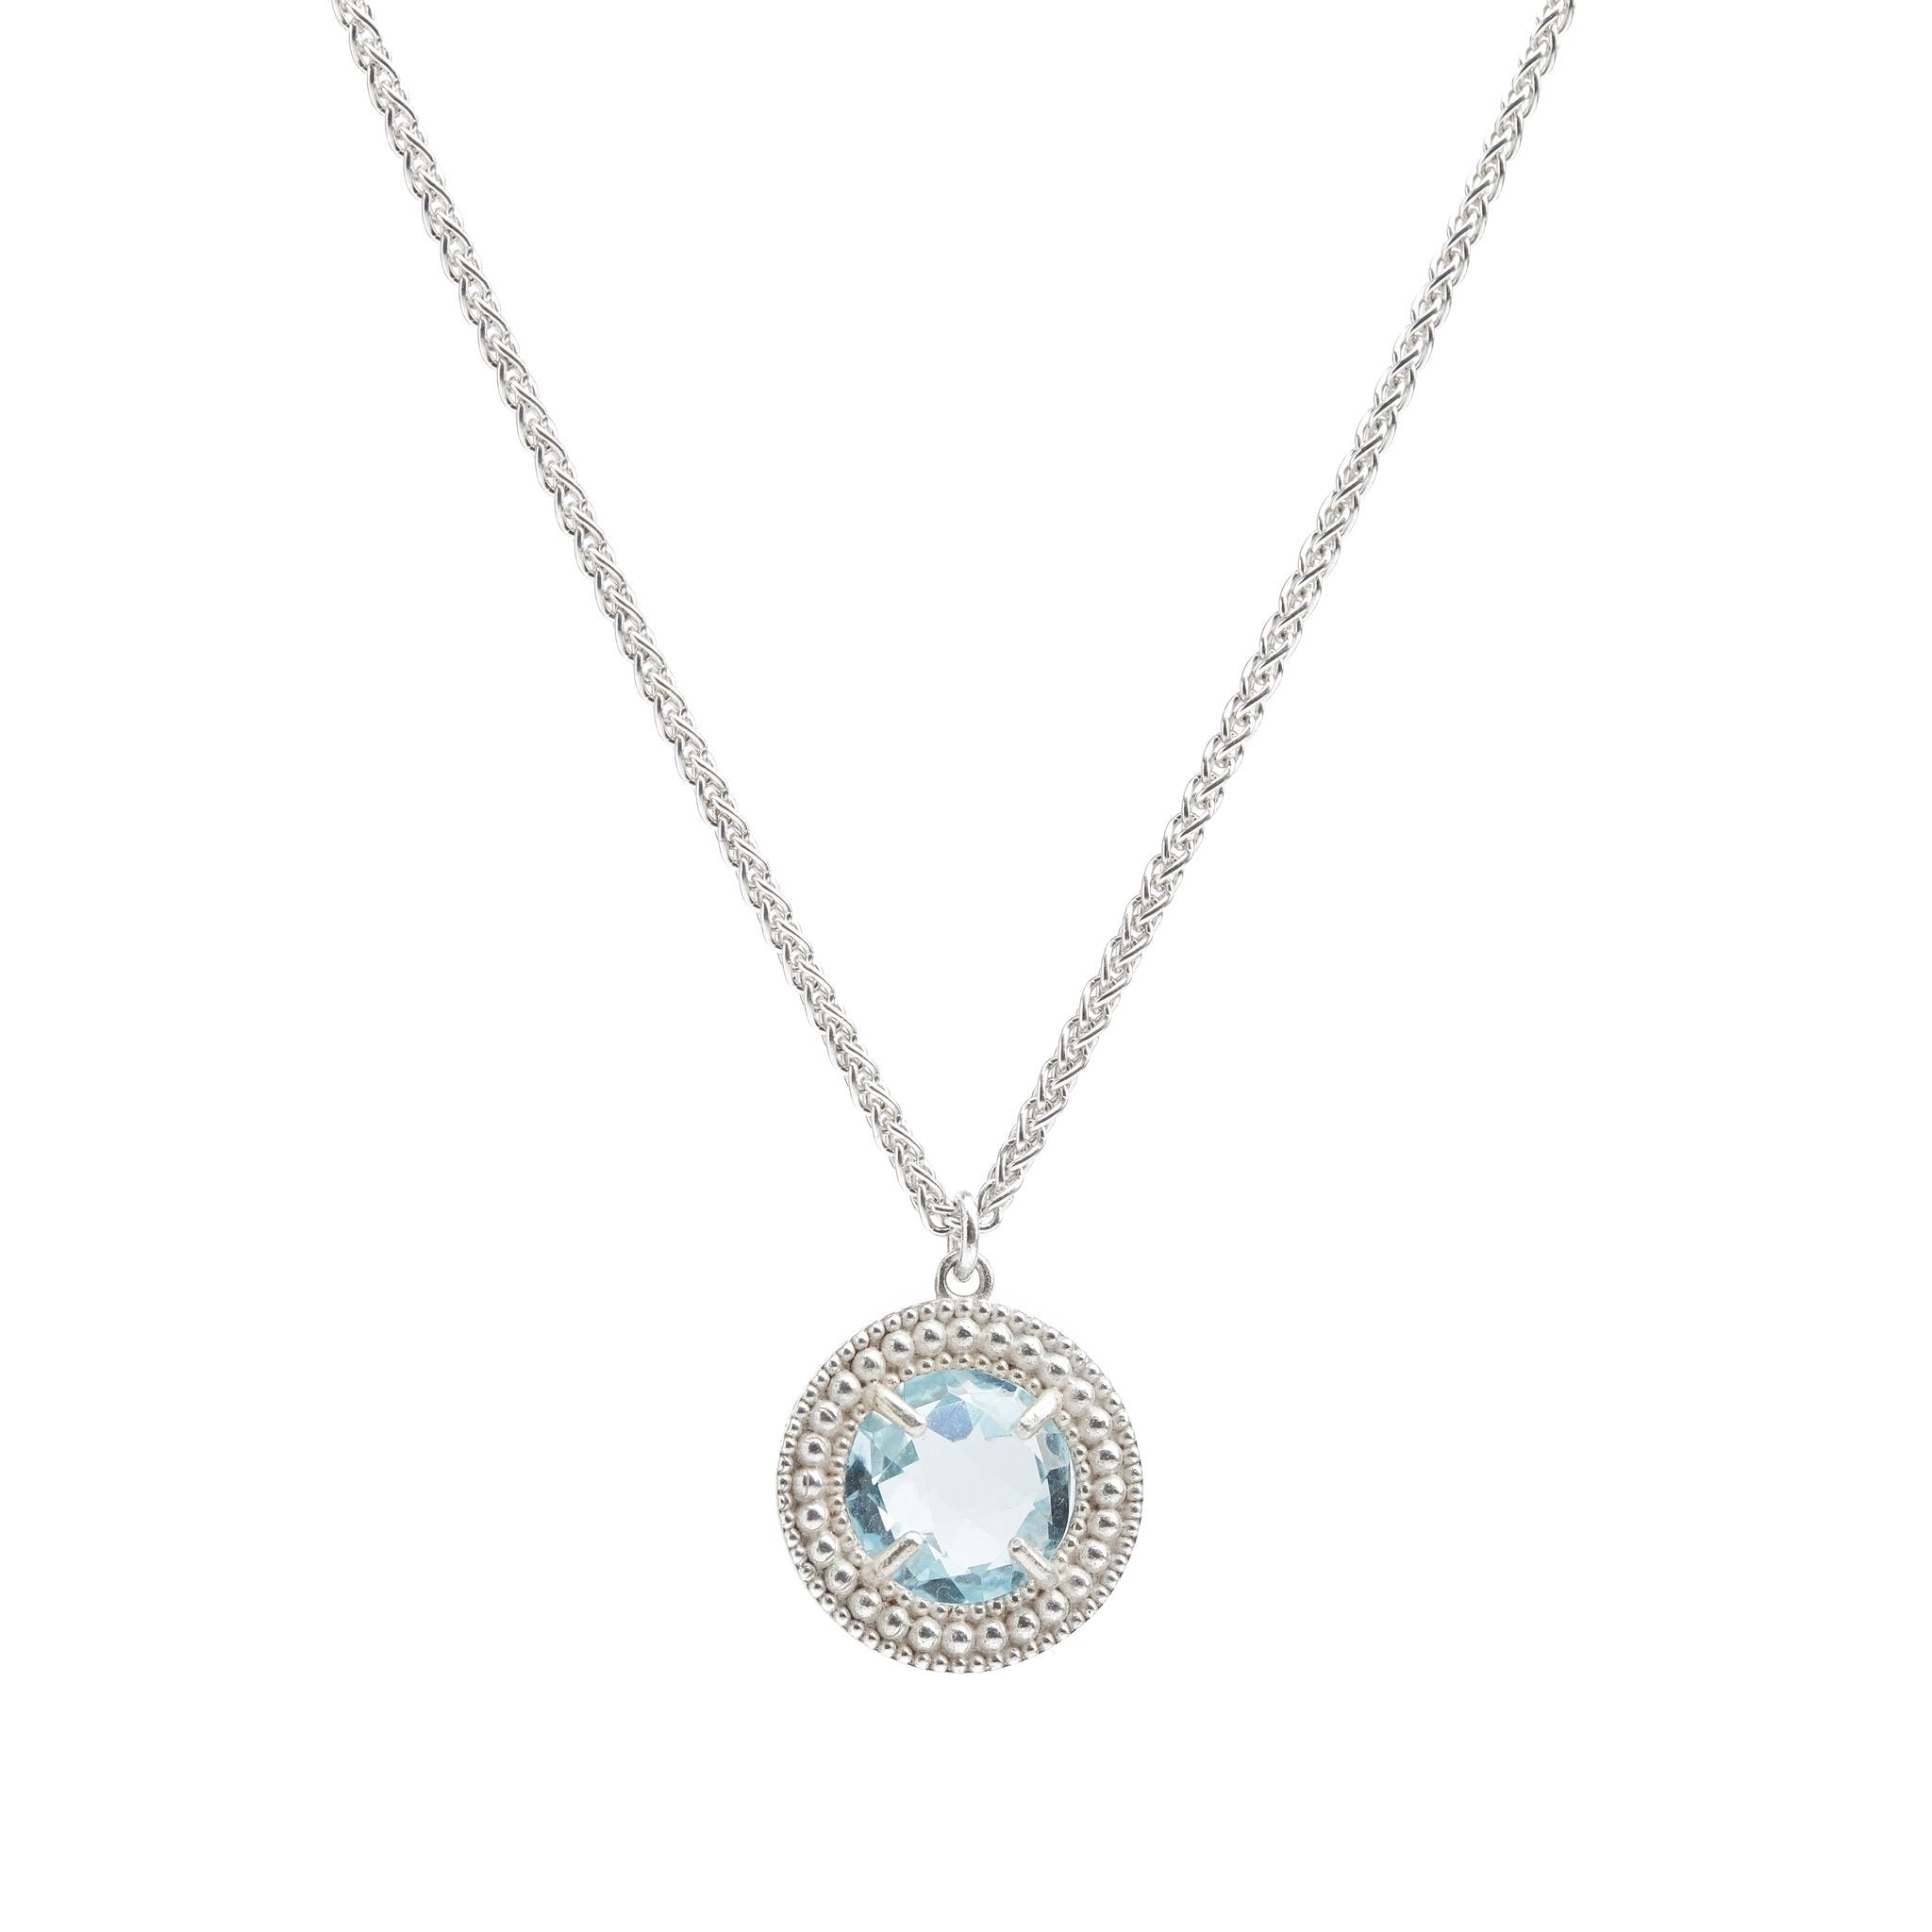 The Renaissance Classic Necklace in Blue Topaz - Christelle Chamberland